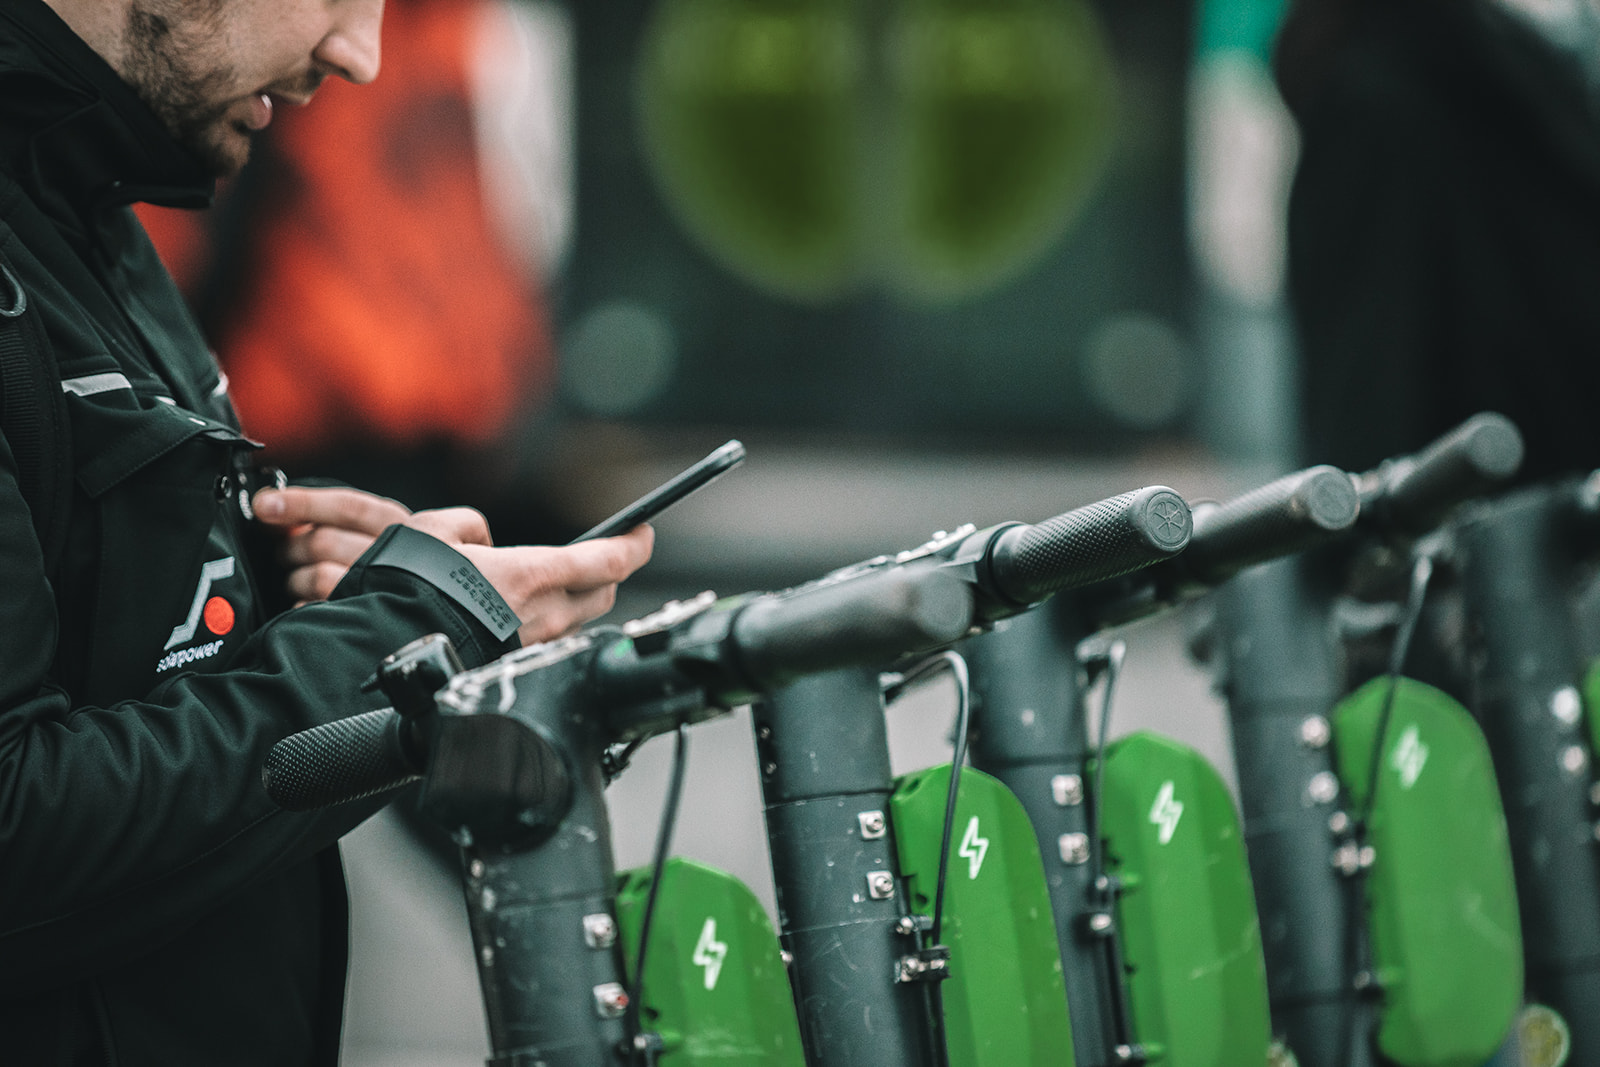 Lime Announces New Paris Swappable Battery Pilot At Station F To Advance Sustainability Of Electric Scooters